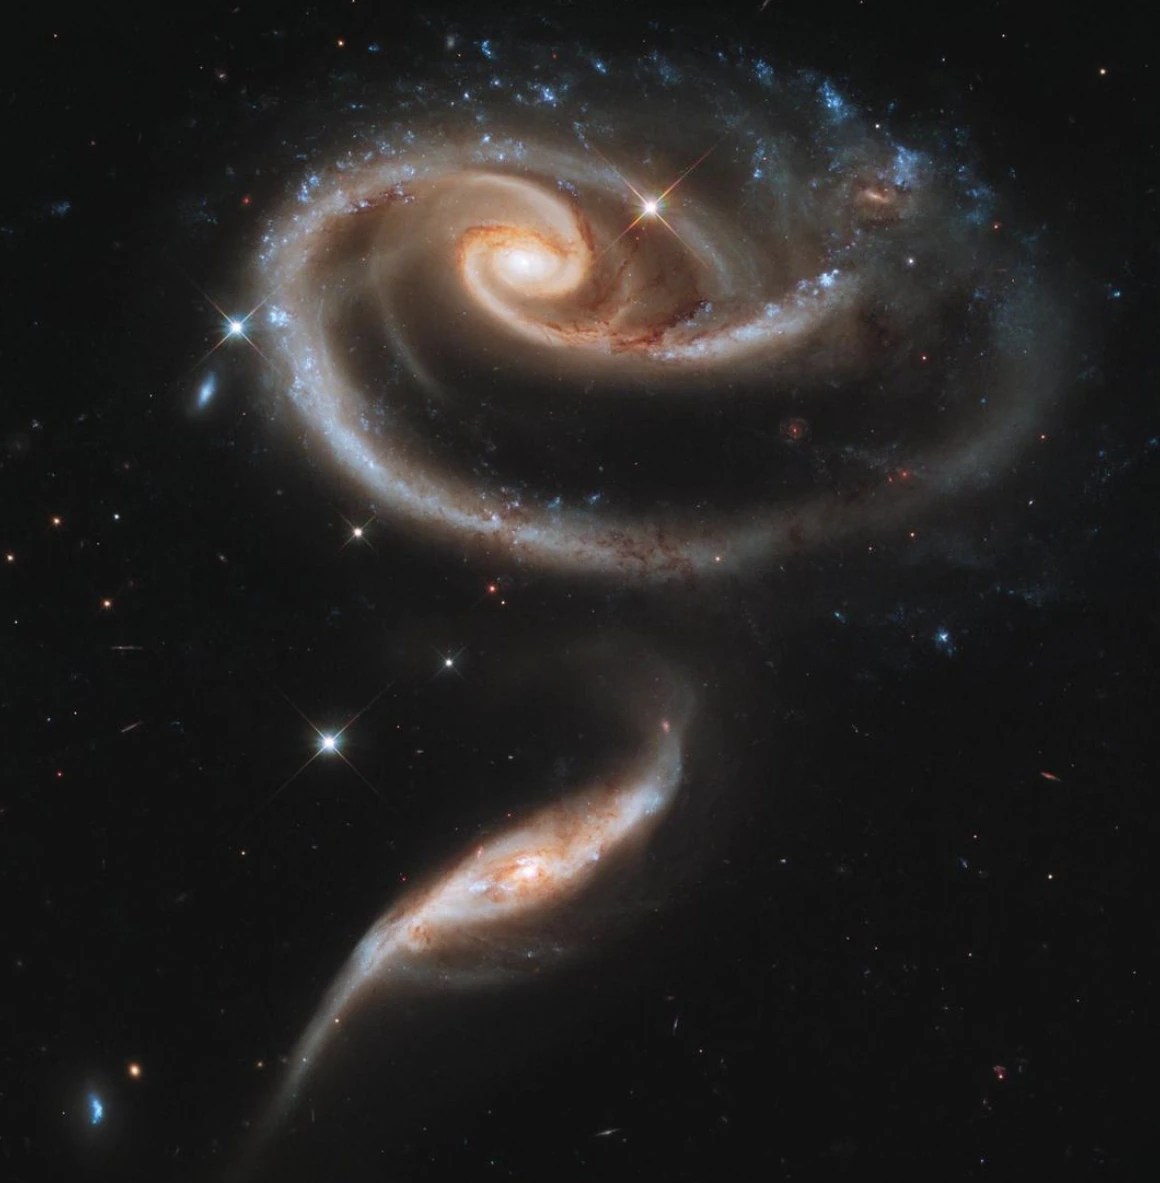 The way these two galaxies are aligned make them look like a rose. A larger, spiral galaxy makes up the petals of the flower, while the smaller galaxy looks like the stem. Intensely bright and hot young blue stars bathe the very top of the image in blue light. In the background of the image are other galaxies and stars.